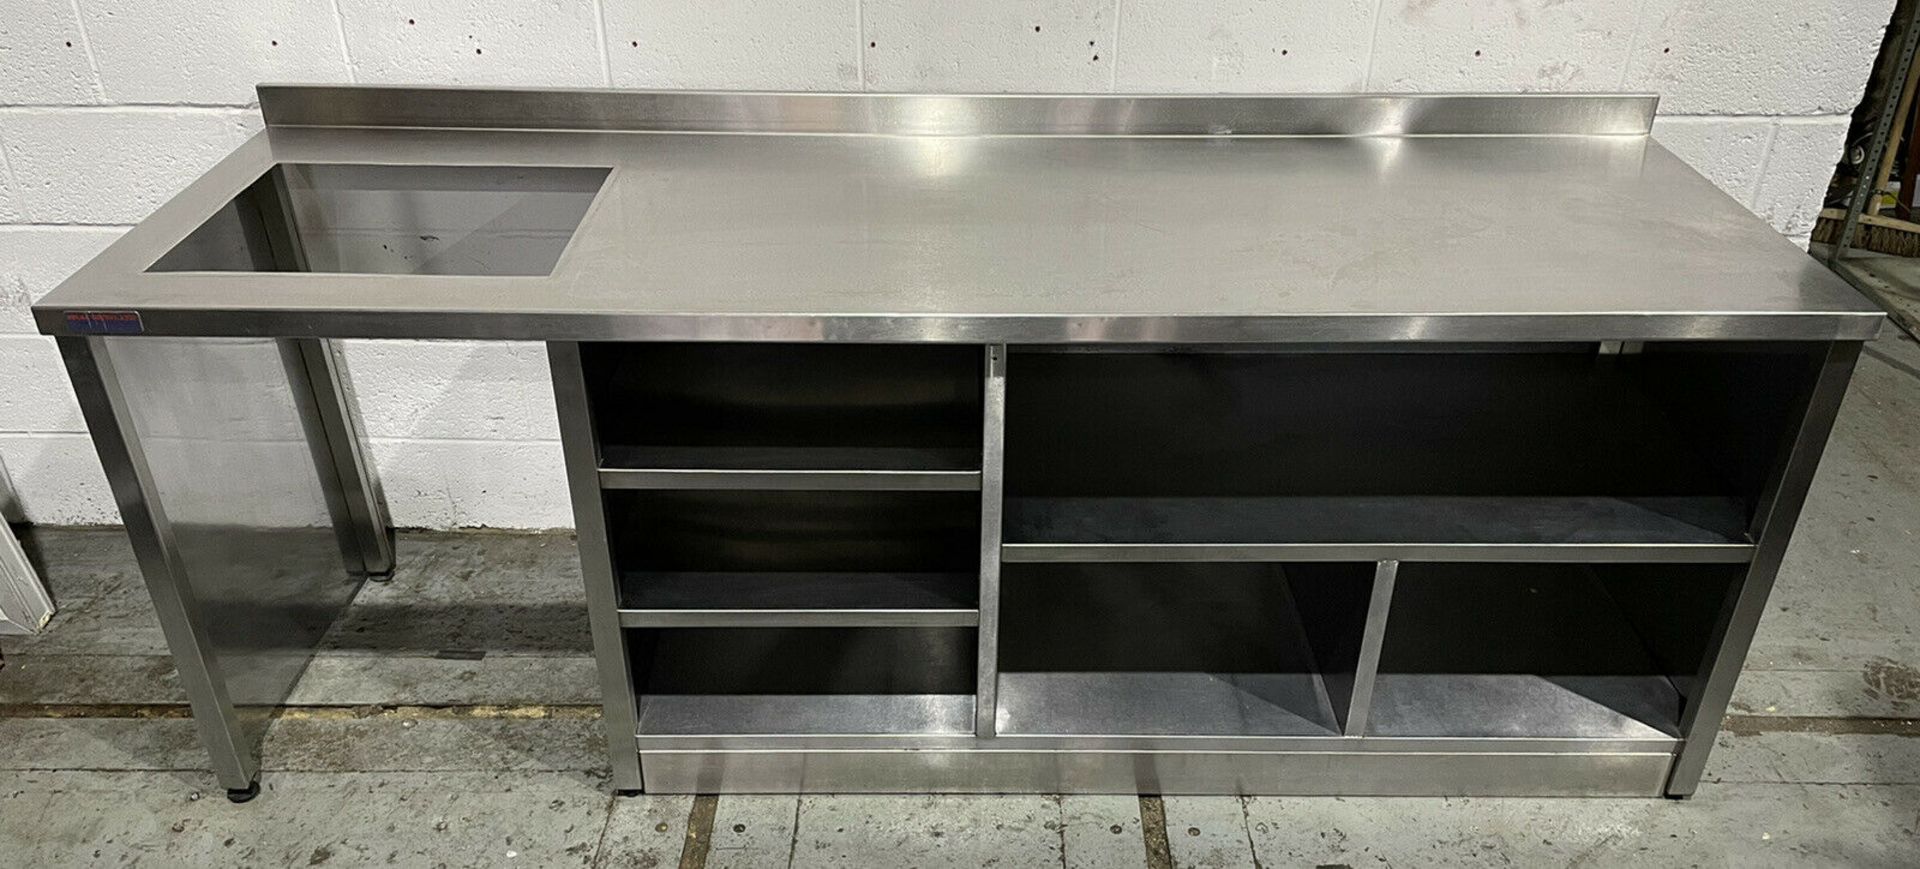 Stainless Steel Preperation Unit with Shelves